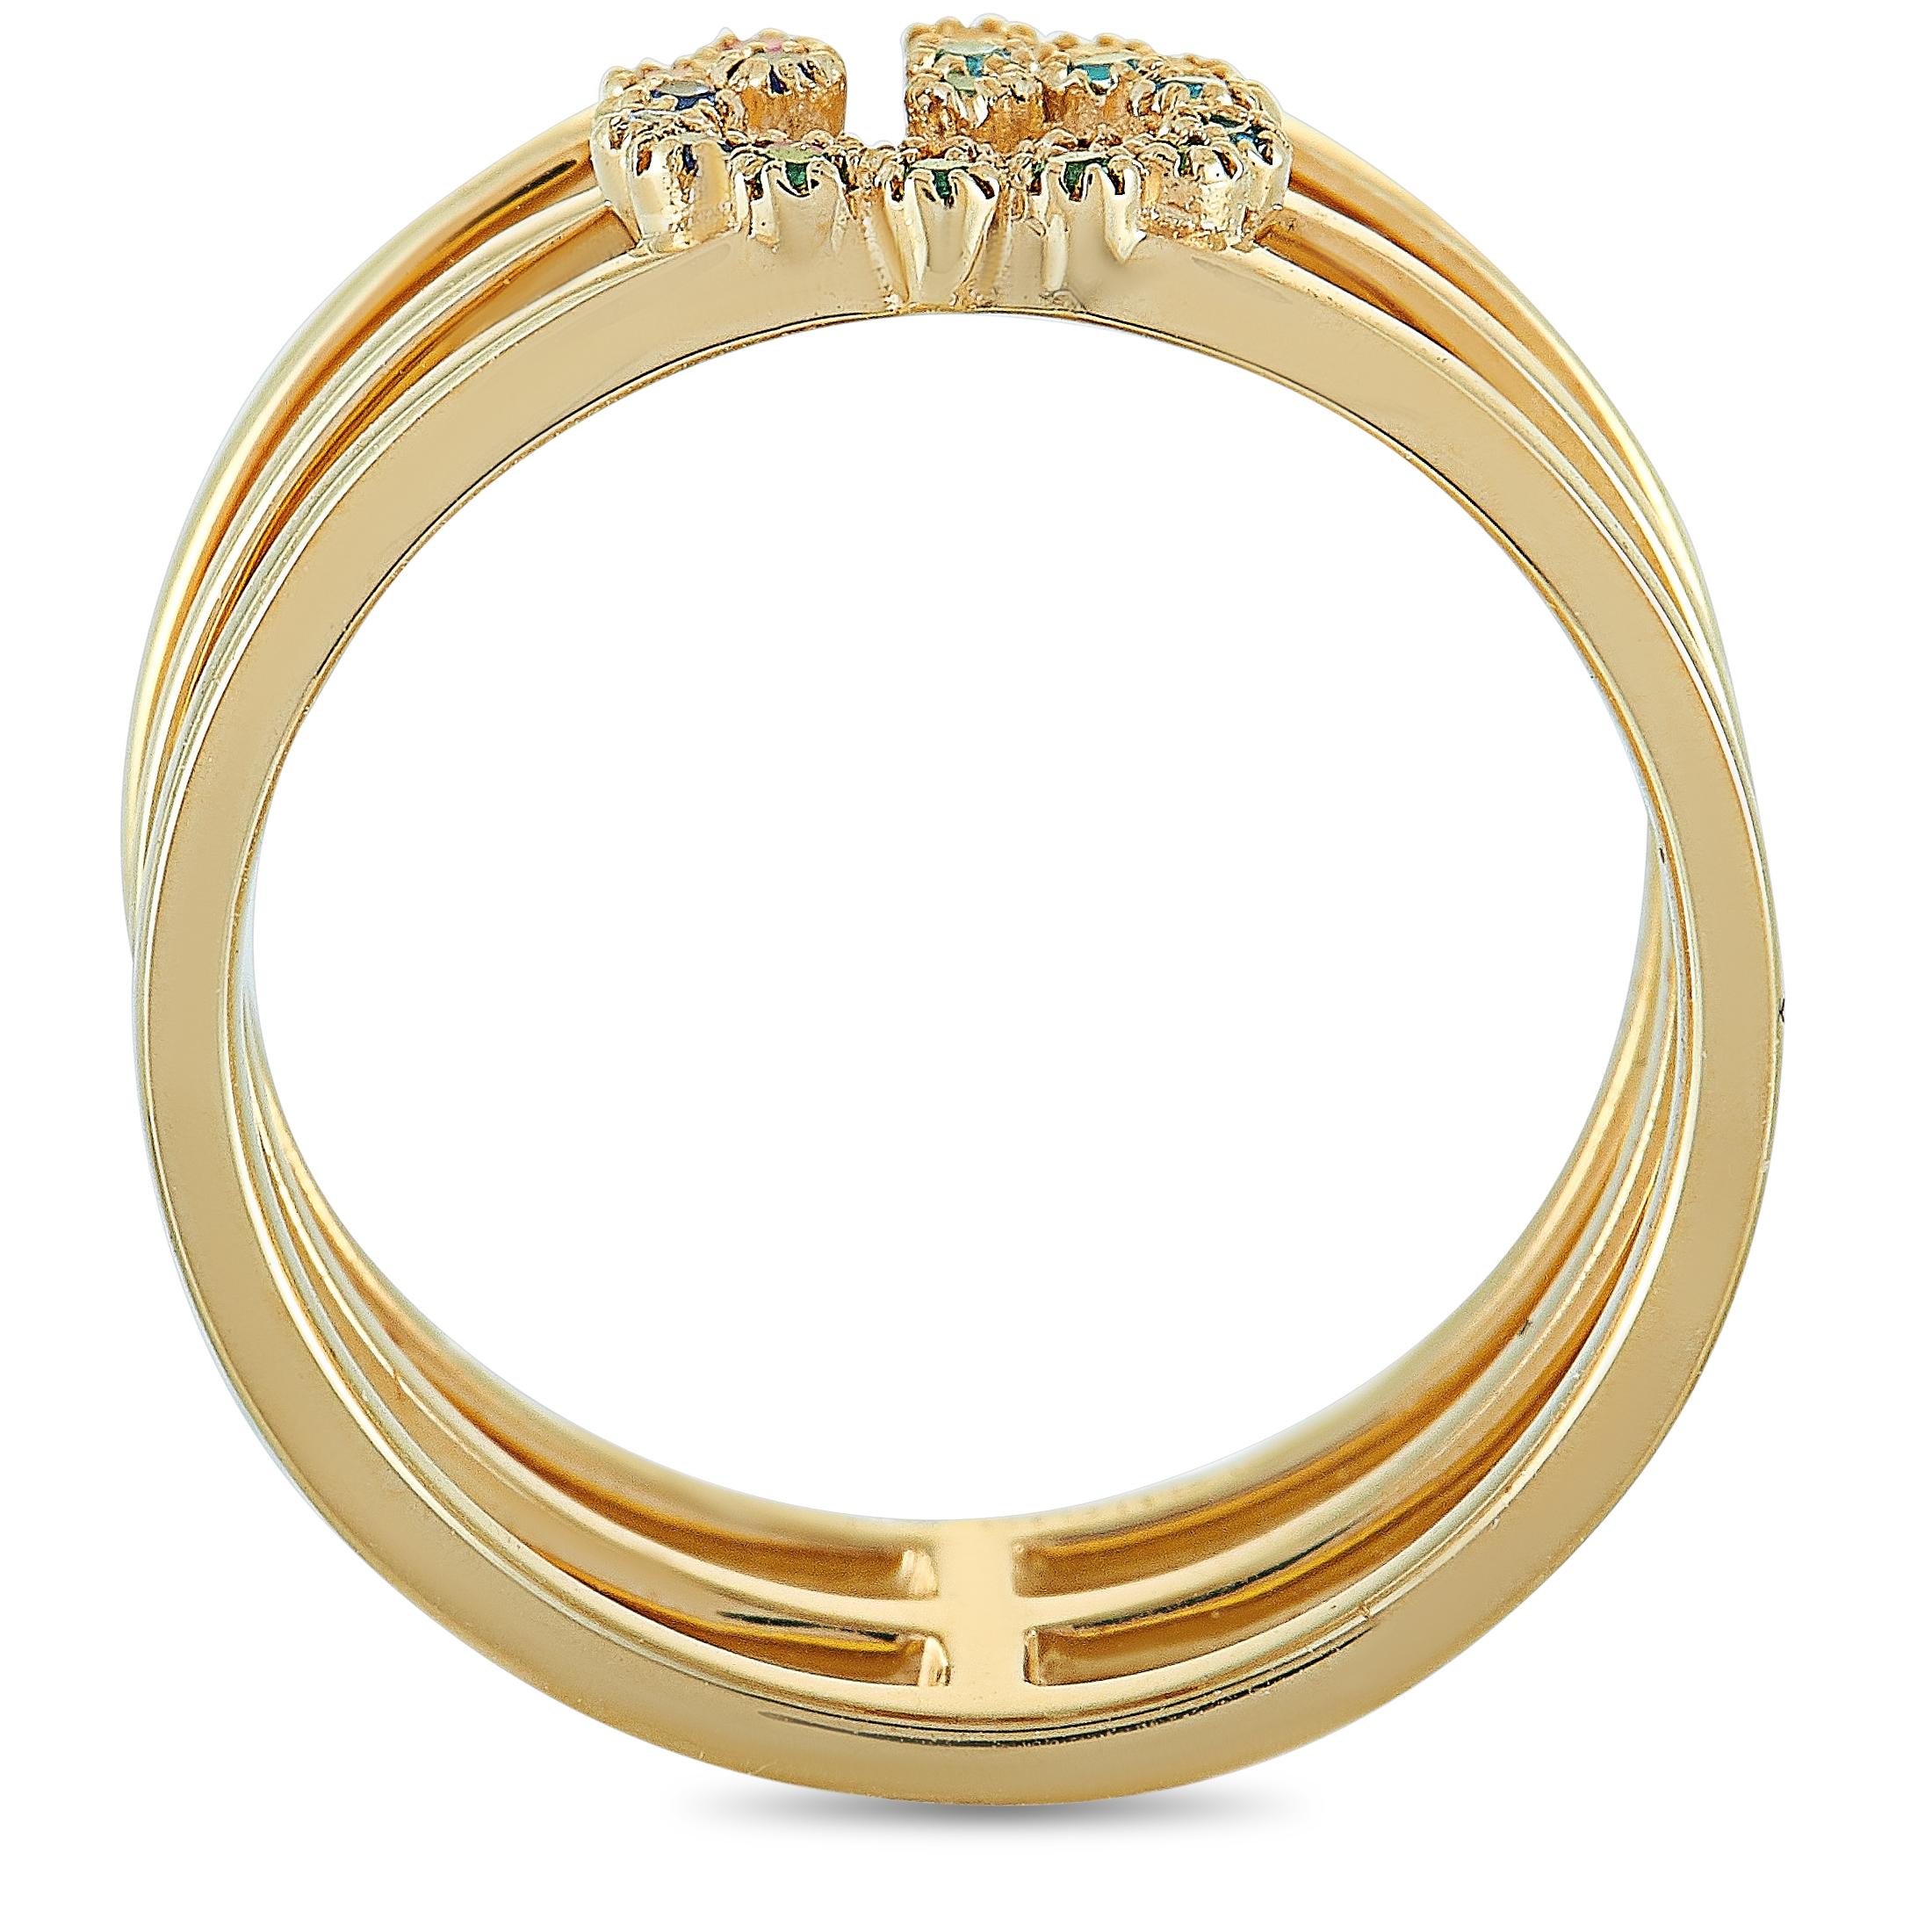 The “GG Running” ring by Gucci is crafted from 18K yellow gold and set with sapphire and tsavorite stones. The ring weighs 5.3 grams, and boasts band thickness of 10 mm and top height of 2 mm, while top dimensions measure 8 by 11 mm.

This item is